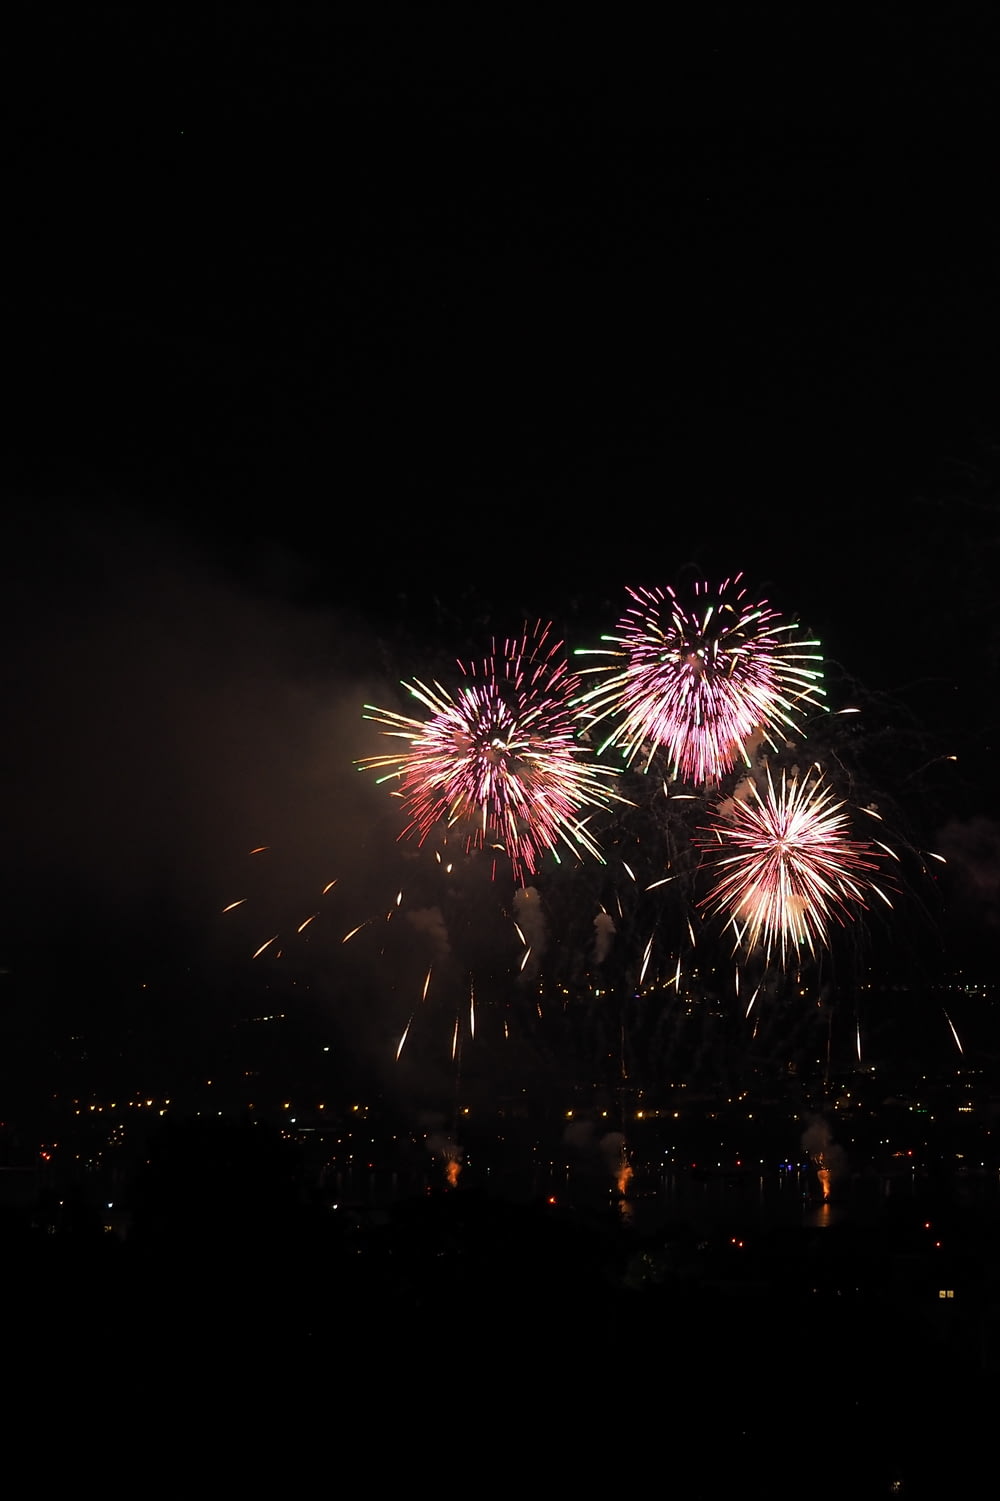 time-lapse photography of fireworks in the sky during nighttime